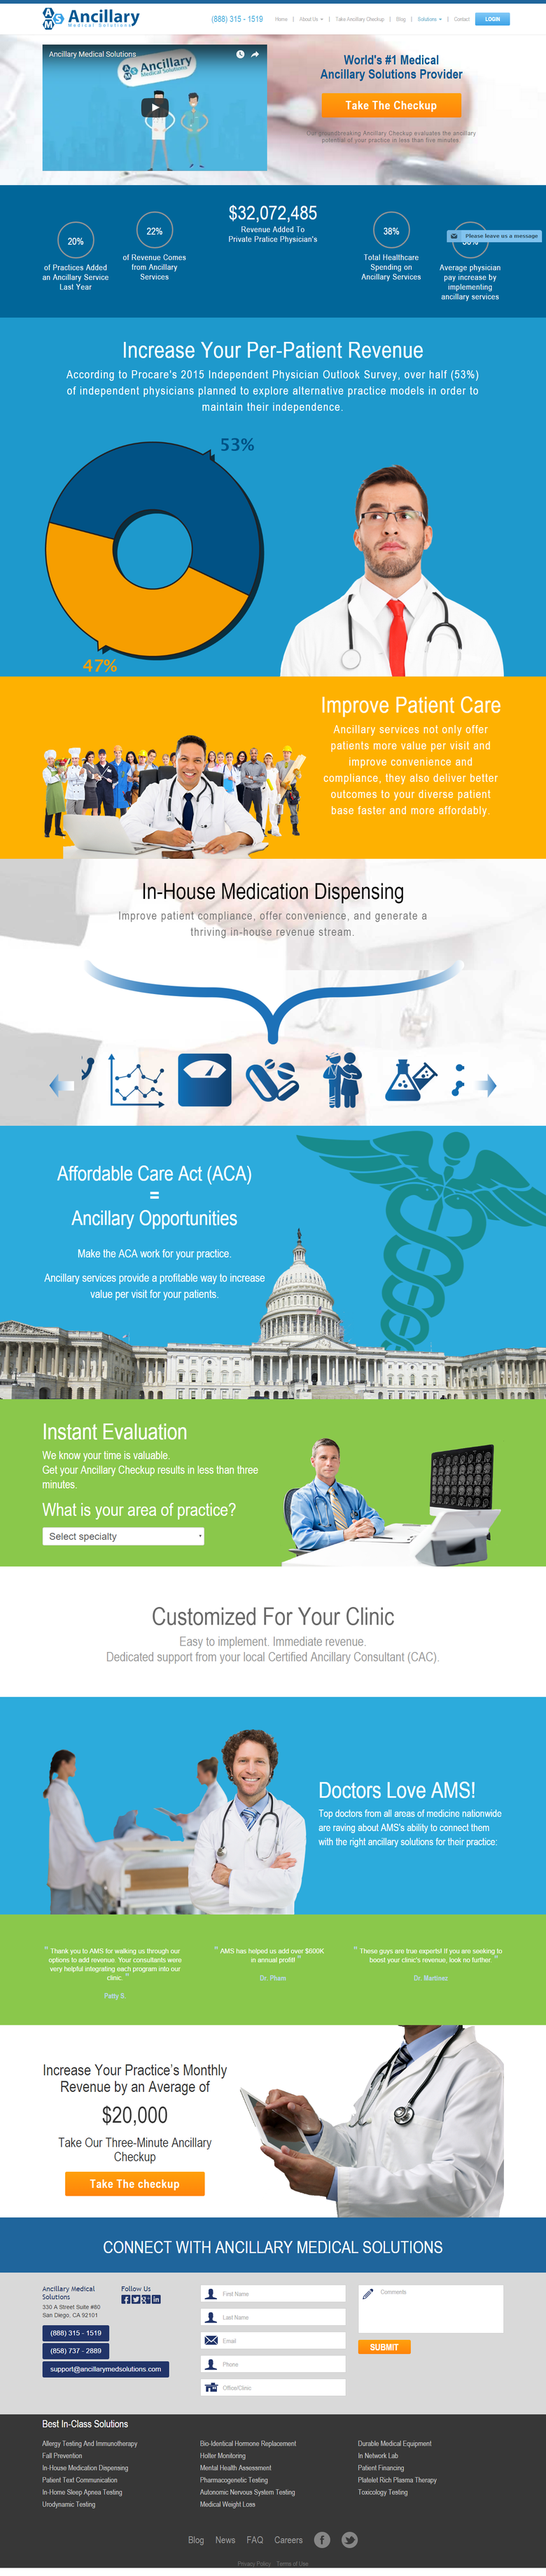 Ancillary Medical Solutions   Improve Patient Care   Revenue